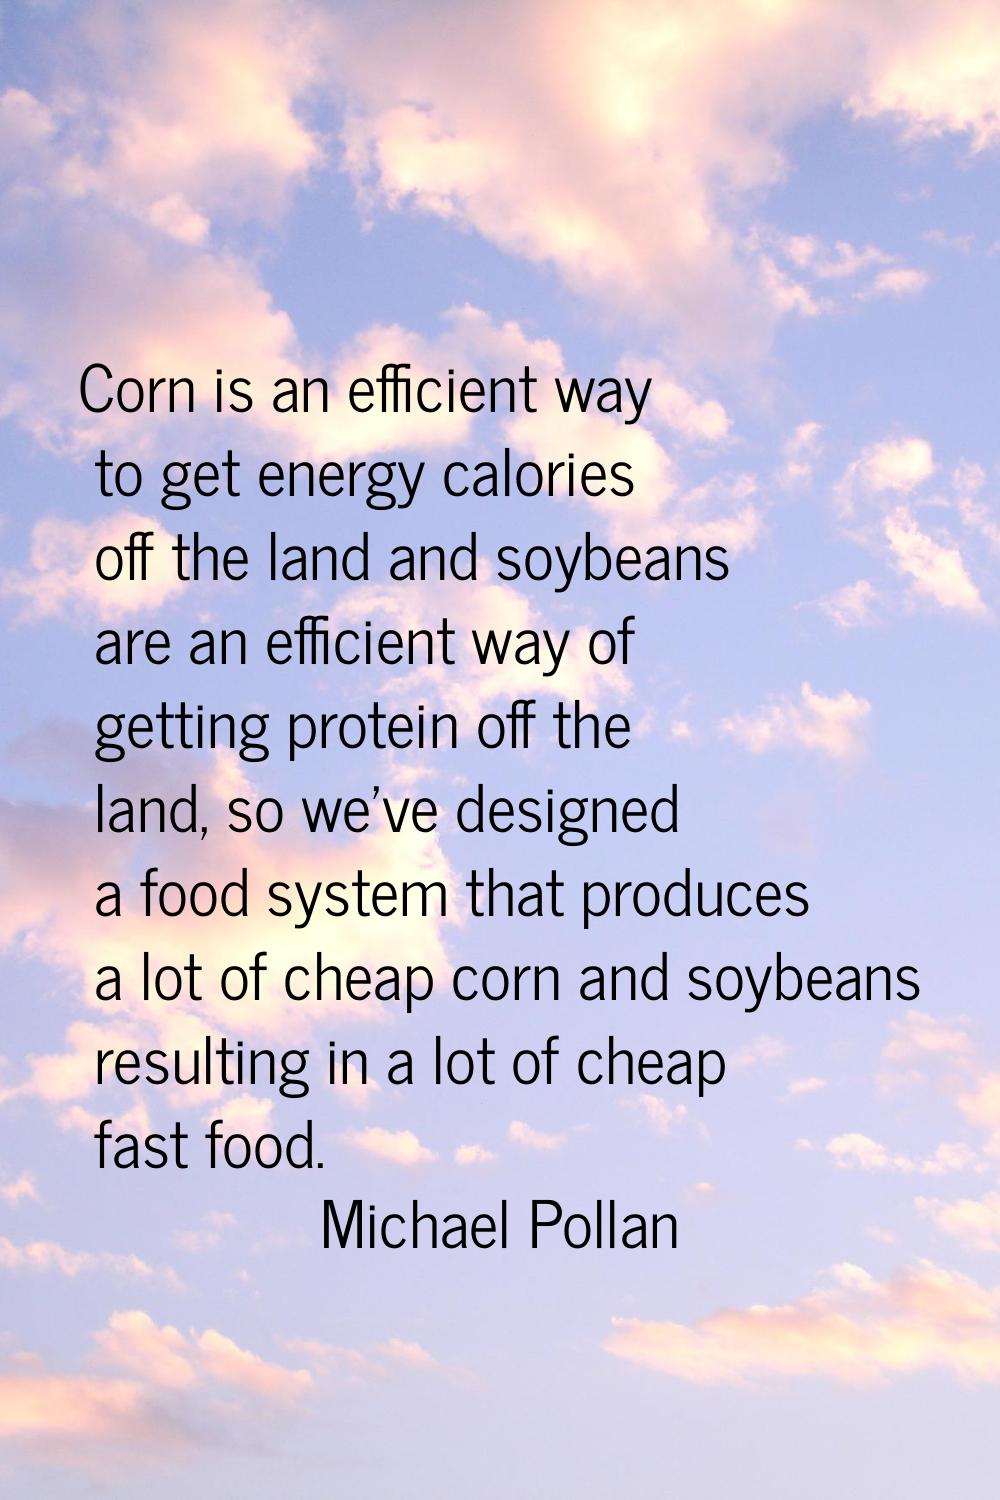 Corn is an efficient way to get energy calories off the land and soybeans are an efficient way of g